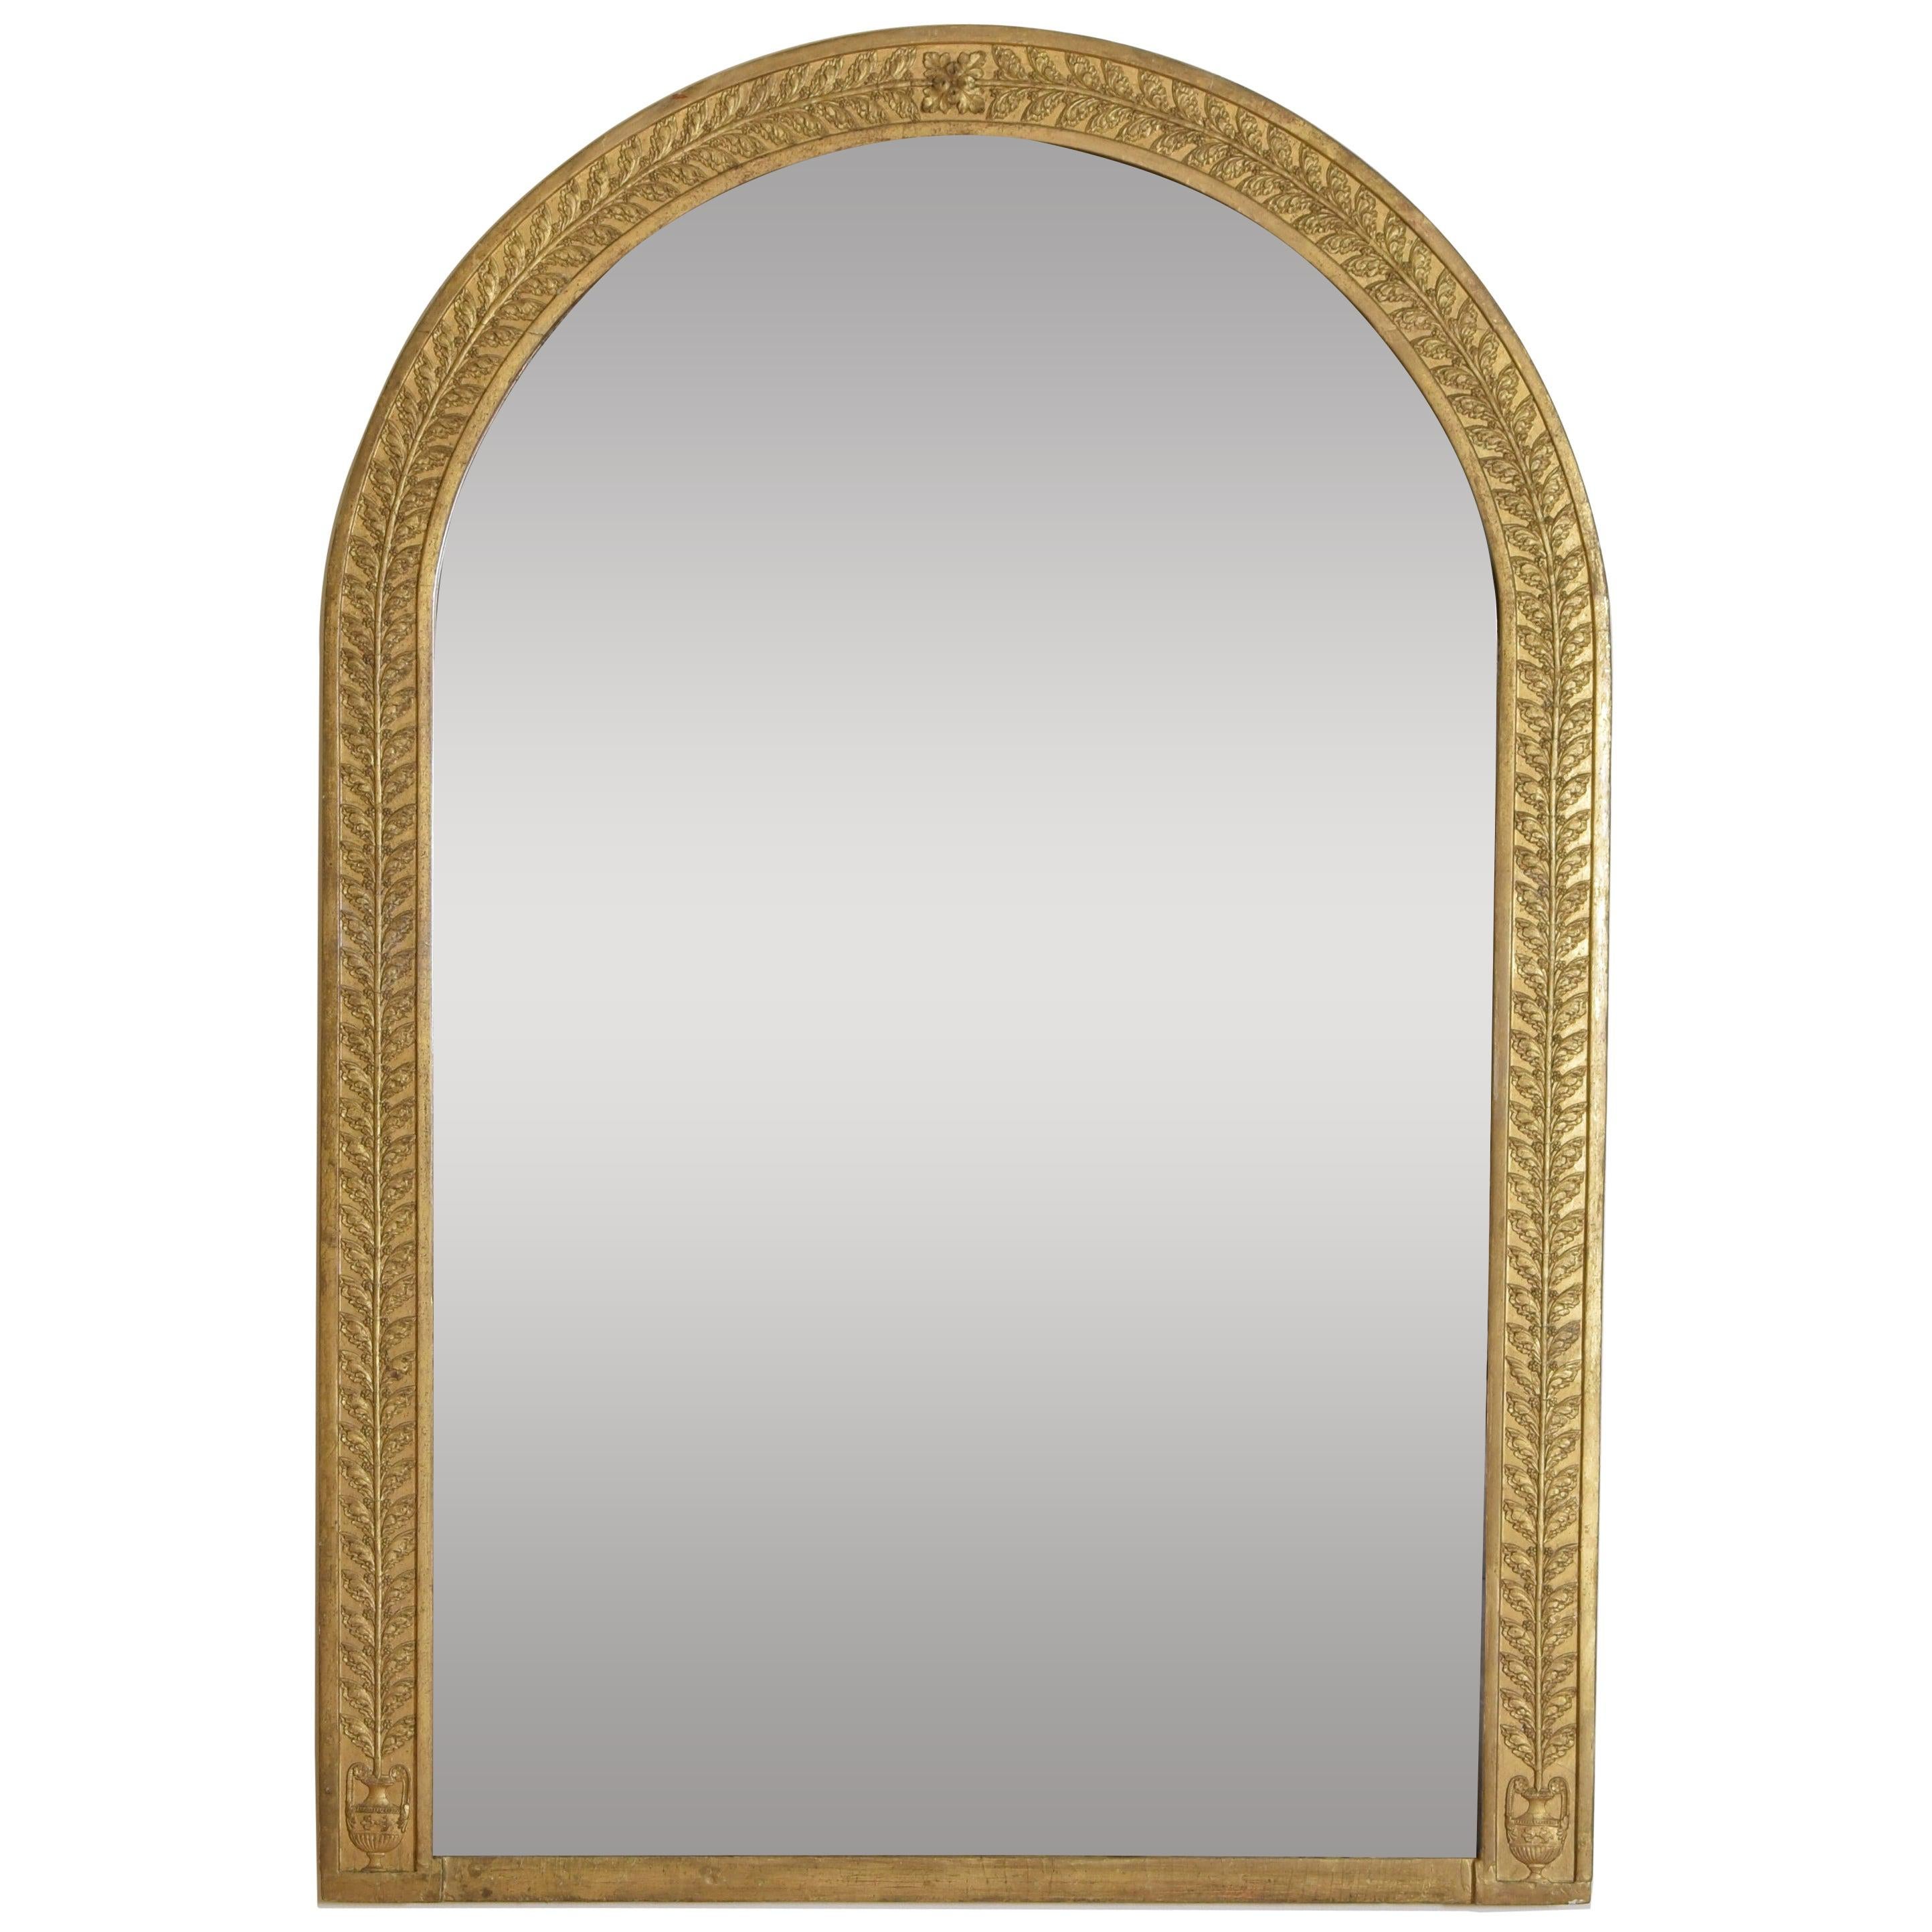 French Empire Period Giltwood and Gilt-Gesso Mirror, Early 19th Century